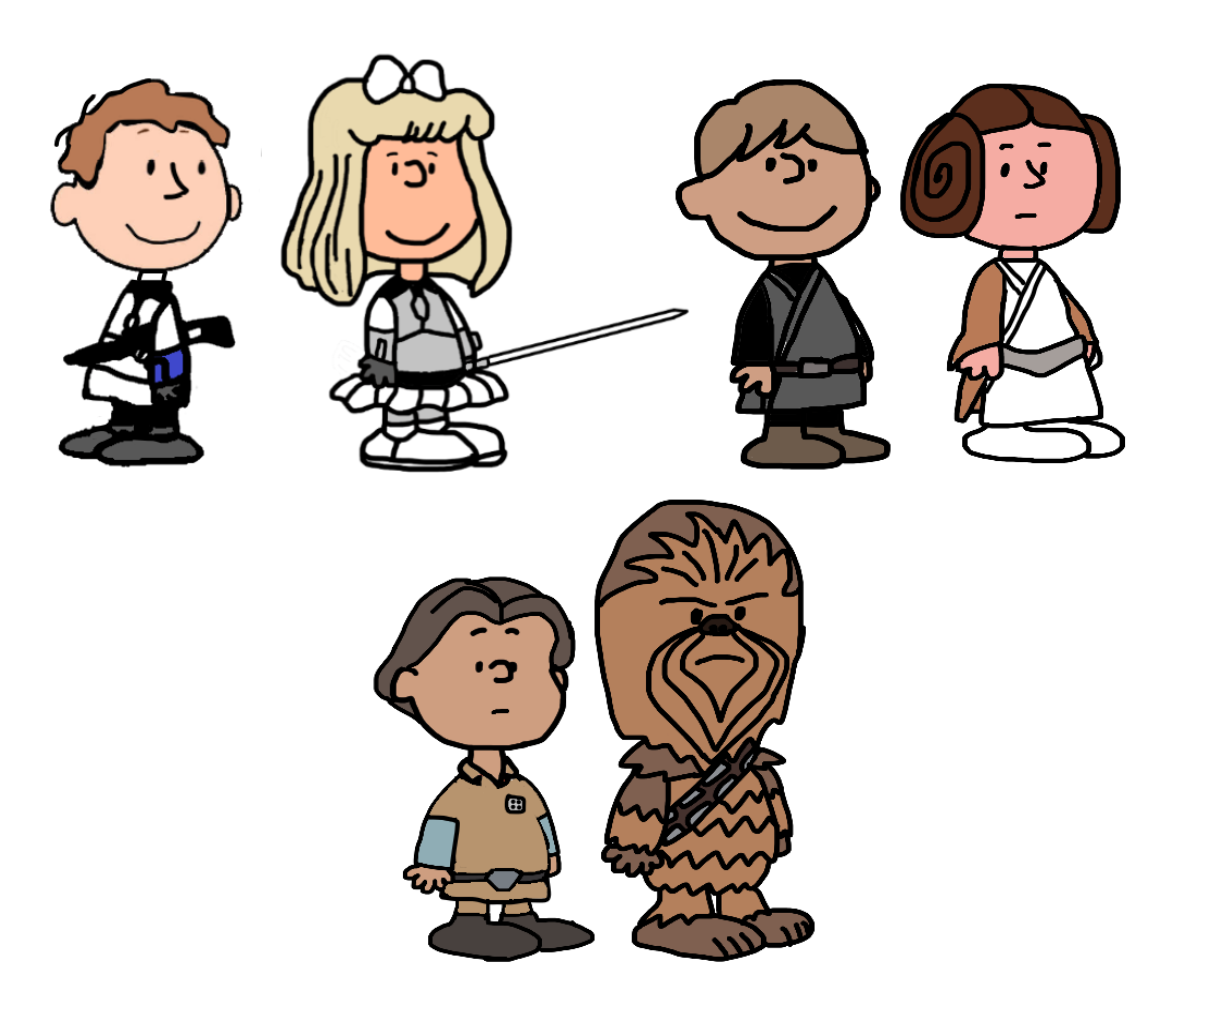 star wars characters clipart